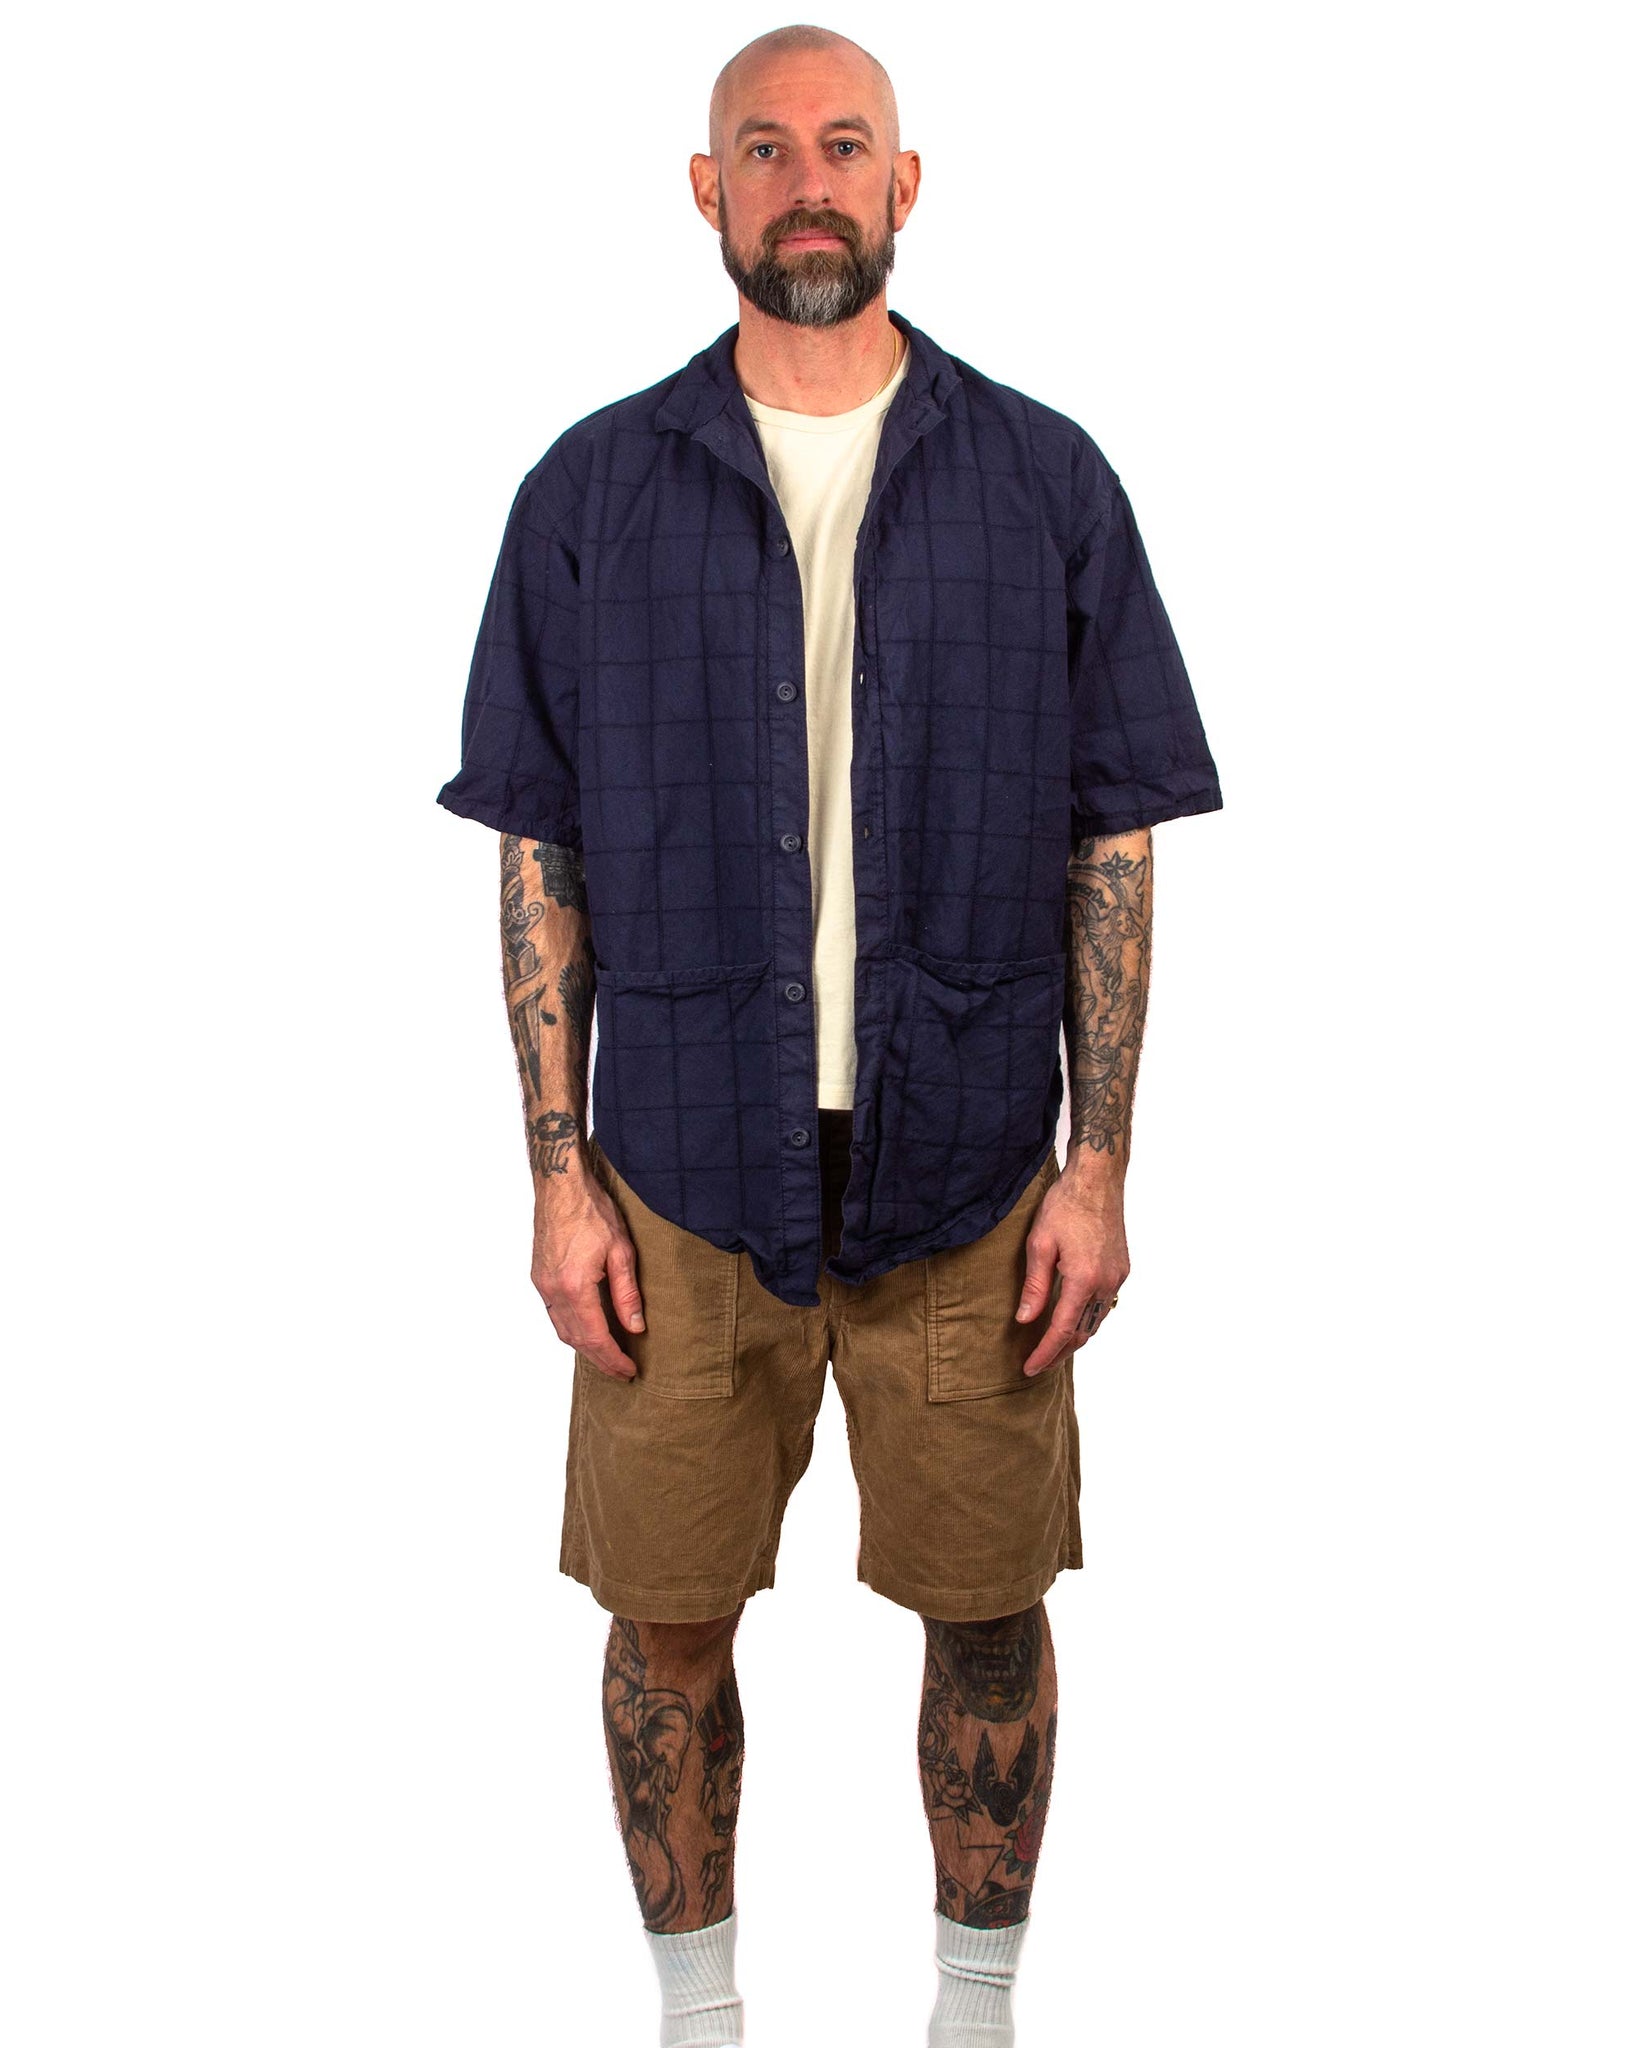 Tender Type 443 Short Sleeve Compass Pocket Shirt Beekeeper's Check Cotton Calico Hadal Blue Model